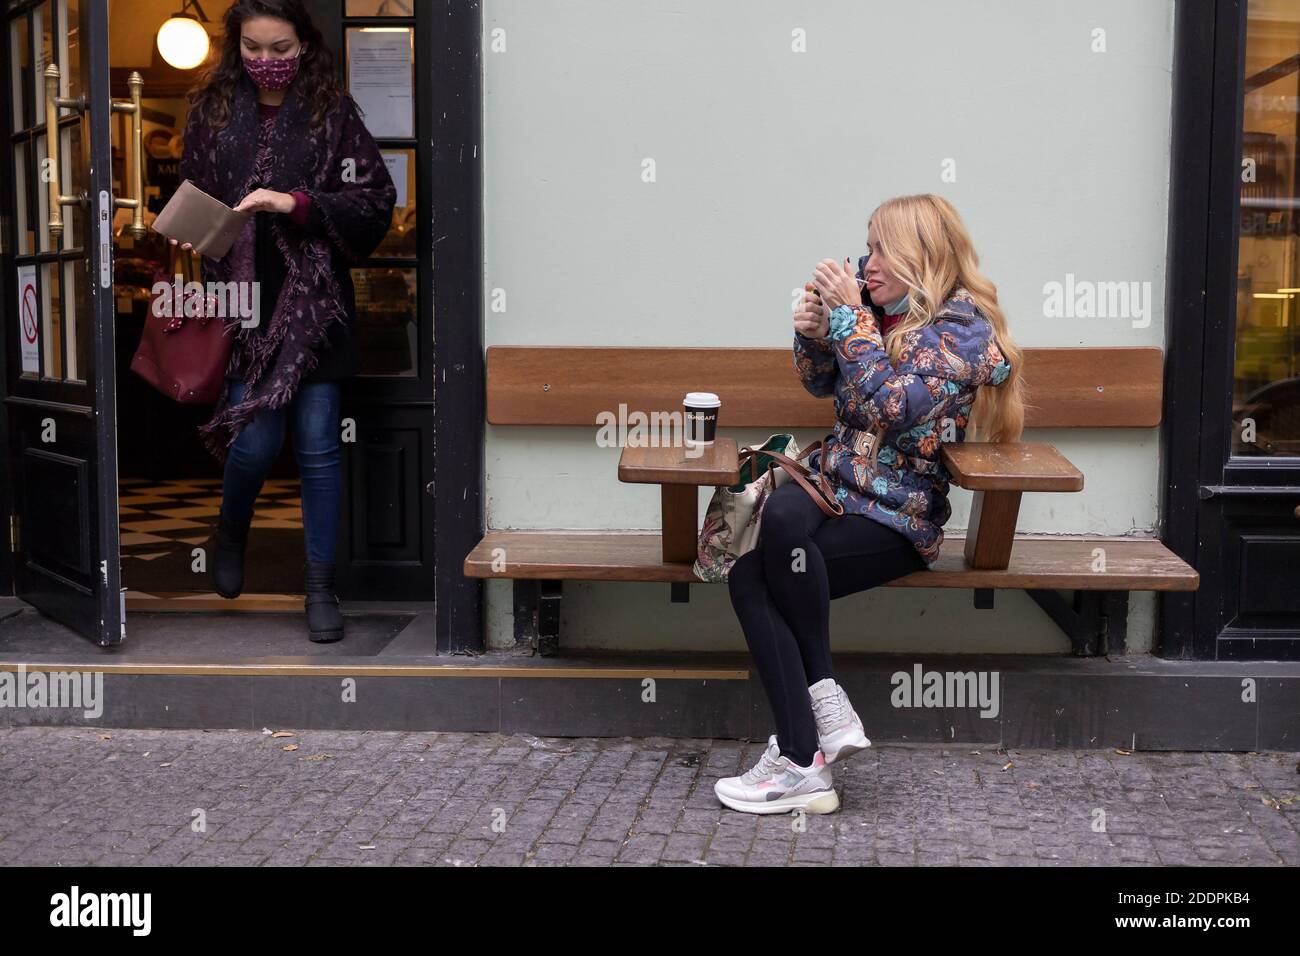 Belgrade, Serbia, Nov 24, 2020: Blond woman sitting with a cup of coffee and lighting a cigarette Stock Photo